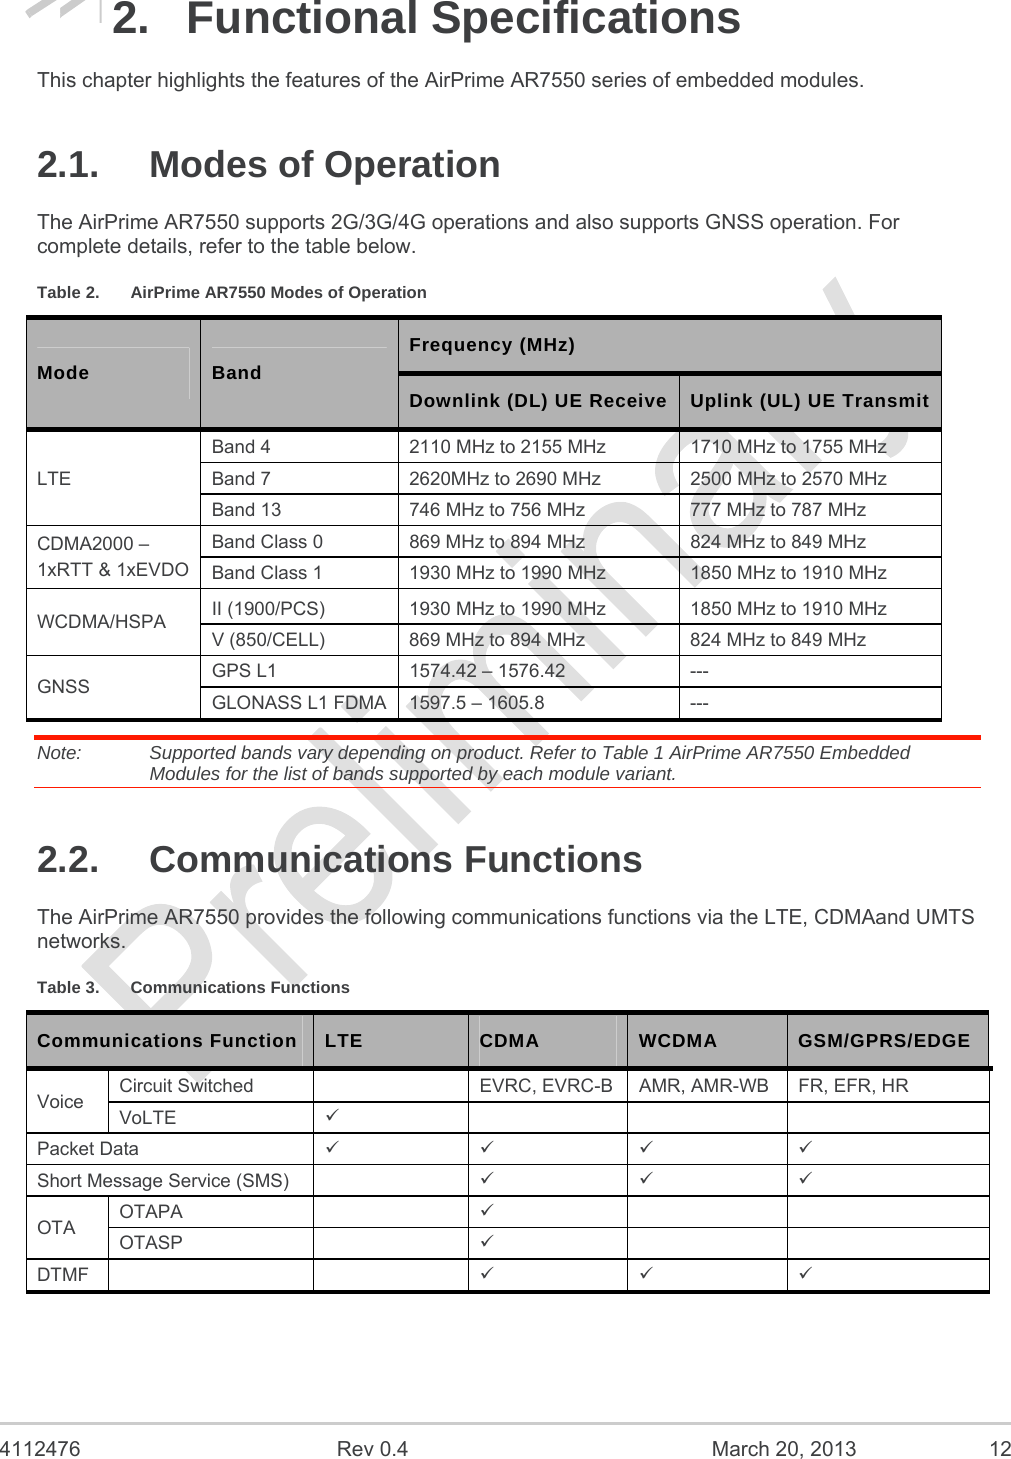  4112476  Rev 0.4  March 20, 2013  12 2. Functional Specifications This chapter highlights the features of the AirPrime AR7550 series of embedded modules. 2.1.  Modes of Operation The AirPrime AR7550 supports 2G/3G/4G operations and also supports GNSS operation. For complete details, refer to the table below. Table 2.  AirPrime AR7550 Modes of Operation Mode  Band Frequency (MHz) Downlink (DL) UE Receive Uplink (UL) UE TransmitLTE Band 4  2110 MHz to 2155 MHz  1710 MHz to 1755 MHz Band 7  2620MHz to 2690 MHz  2500 MHz to 2570 MHz   Band 13  746 MHz to 756 MHz  777 MHz to 787 MHz CDMA2000 –  1xRTT &amp; 1xEVDO Band Class 0  869 MHz to 894 MHz  824 MHz to 849 MHz Band Class 1  1930 MHz to 1990 MHz  1850 MHz to 1910 MHz WCDMA/HSPA  II (1900/PCS)  1930 MHz to 1990 MHz  1850 MHz to 1910 MHz V (850/CELL)  869 MHz to 894 MHz  824 MHz to 849 MHz GNSS  GPS L1  1574.42 – 1576.42  --- GLONASS L1 FDMA  1597.5 – 1605.8  --- Note:   Supported bands vary depending on product. Refer to Table 1 AirPrime AR7550 Embedded Modules for the list of bands supported by each module variant. 2.2. Communications Functions The AirPrime AR7550 provides the following communications functions via the LTE, CDMAand UMTS networks. Table 3.  Communications Functions Communications Function  LTE  CDMA  WCDMA  GSM/GPRS/EDGE Voice  Circuit Switched    EVRC, EVRC-B  AMR, AMR-WB  FR, EFR, HR VoLTE      Packet Data      Short Message Service (SMS)       OTA  OTAPA      OTASP      DTMF        